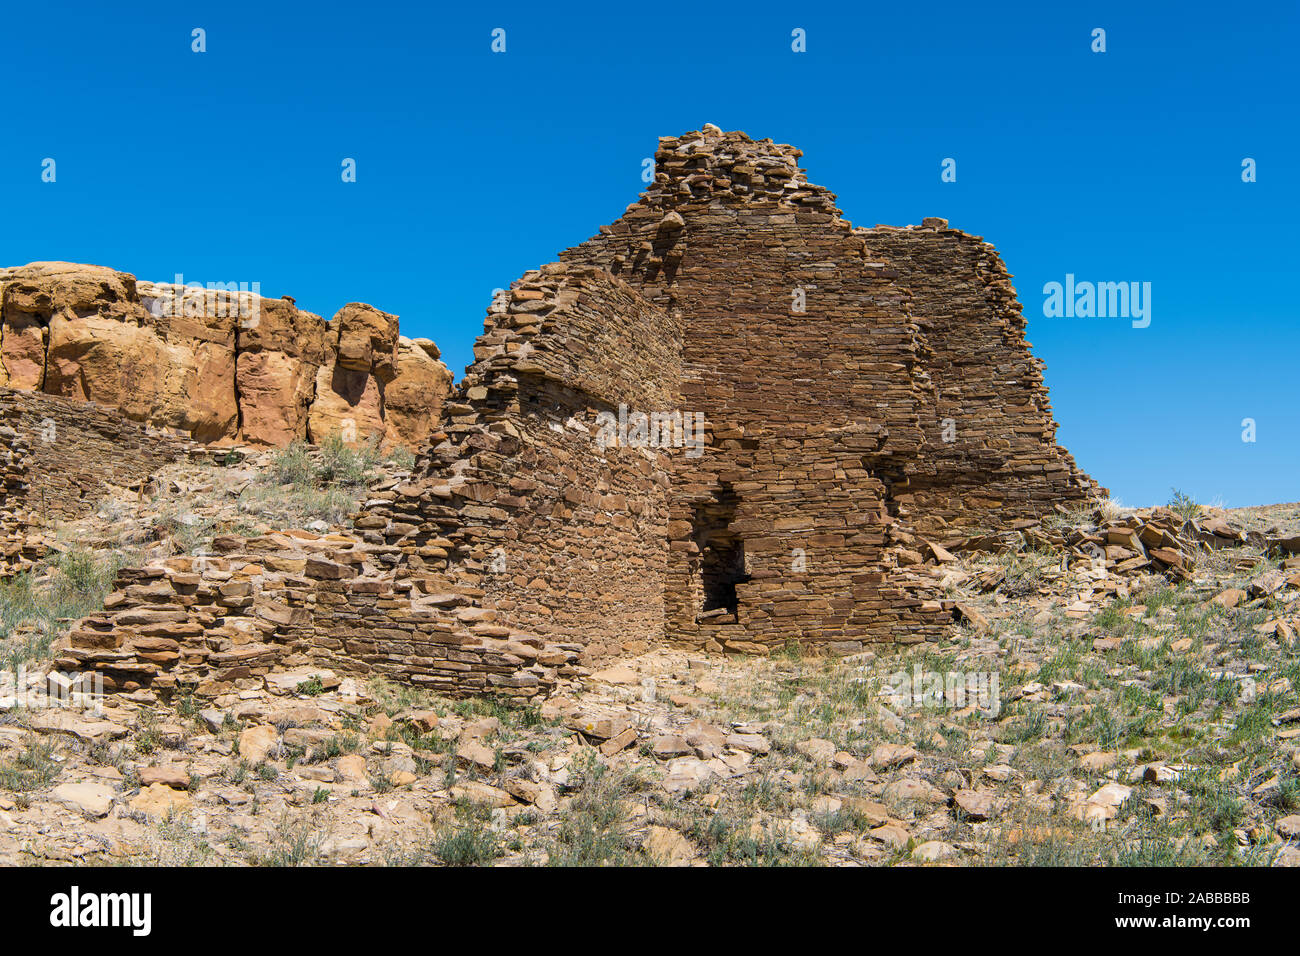 Ancient ruins of the Puebloan culture in the Chaco Culture National Historical Park, a Word Heritage site in New Mexico, USA Stock Photo